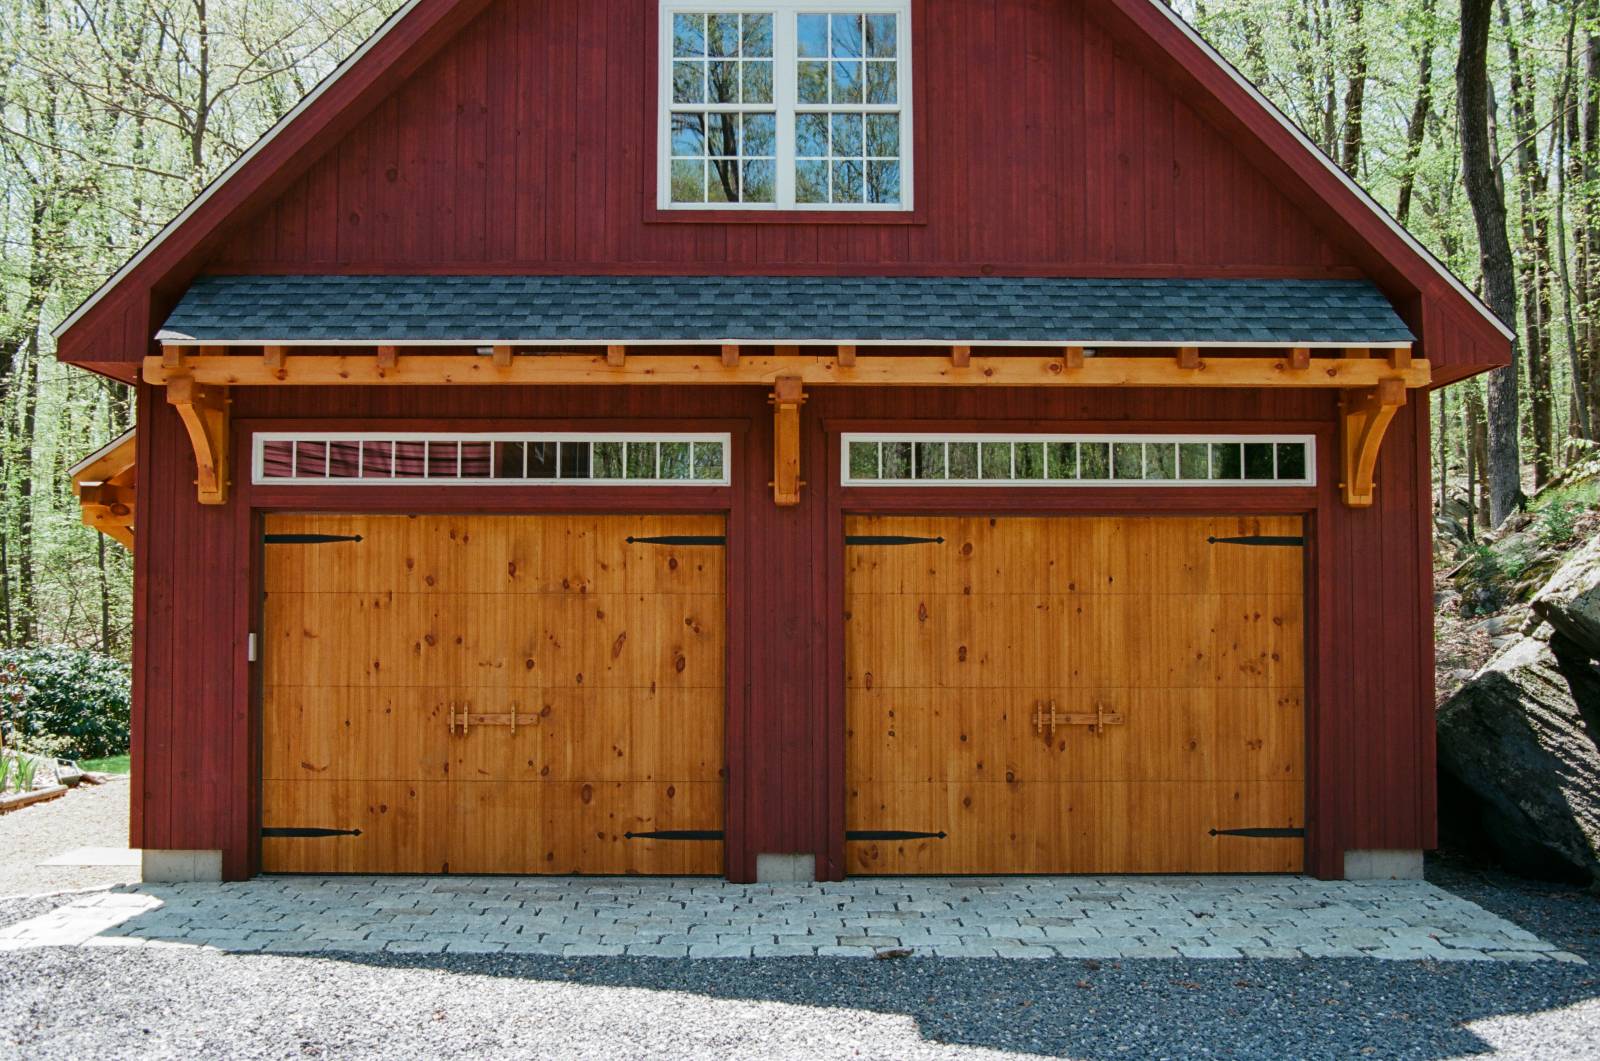 Front view of the garage with timber accents